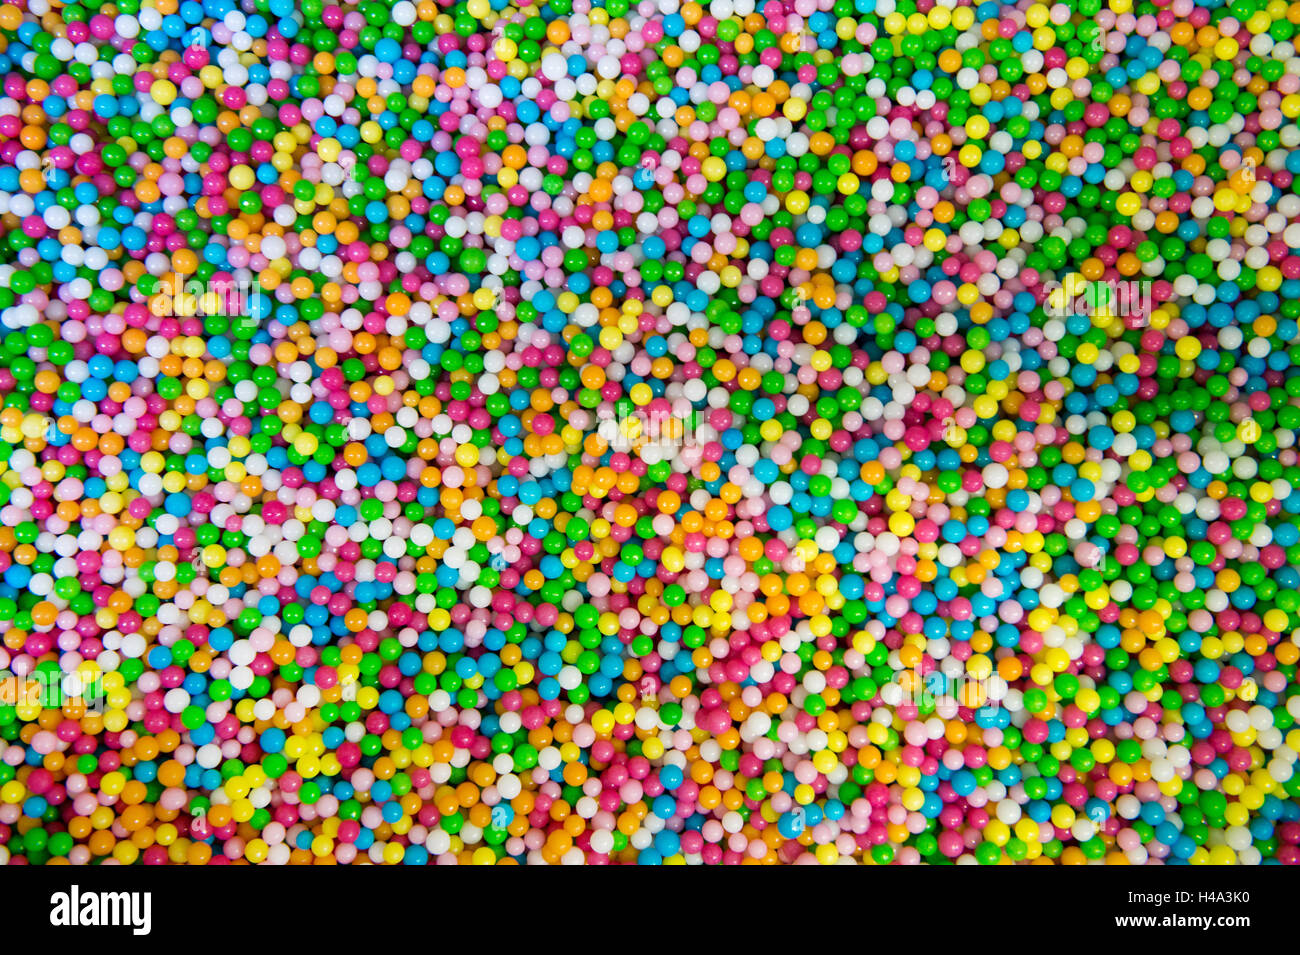 Gorlitz, Germany. 20th Sep, 2016. Colourful love pearls can be seen in the sweets factory of Rudolf Hoinkis GmbH in Gorlitz, Germany, 20 September 2016. The sweets factory was founded on 16 August 1896 by Rudolf Hoinkis, the grandfather of nowadays' factory owner, Matthias Hoinkis. The business owes its worldwide publicity to the invention of the 'love pearl'. PHOTO: ARNO BURGI/dpa/Alamy Live News Stock Photo